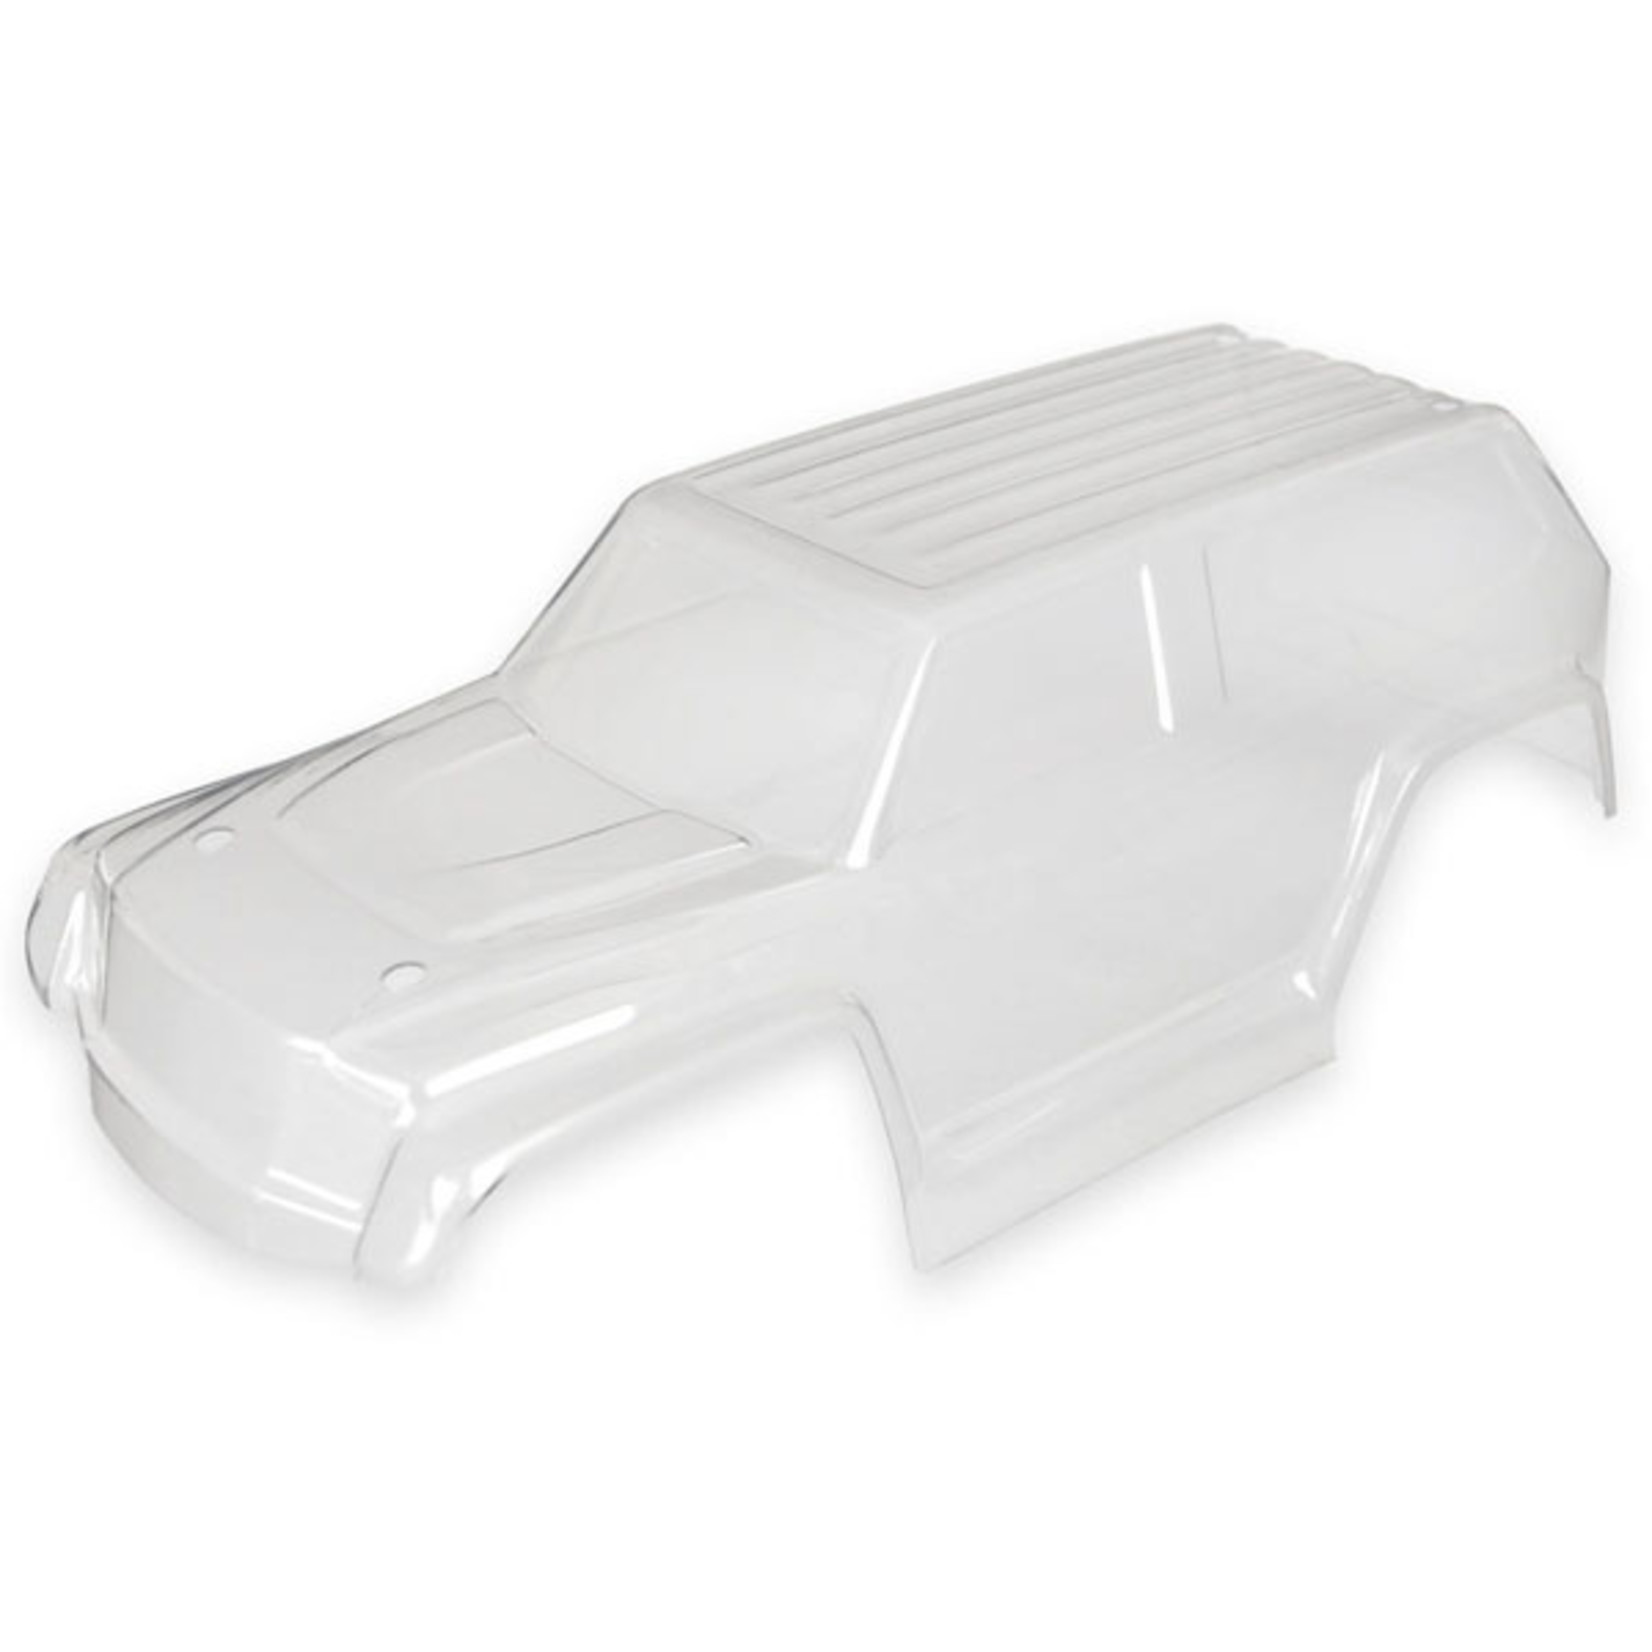 Traxxas 7611 - Body, Teton, (clear, requires painting)/ de